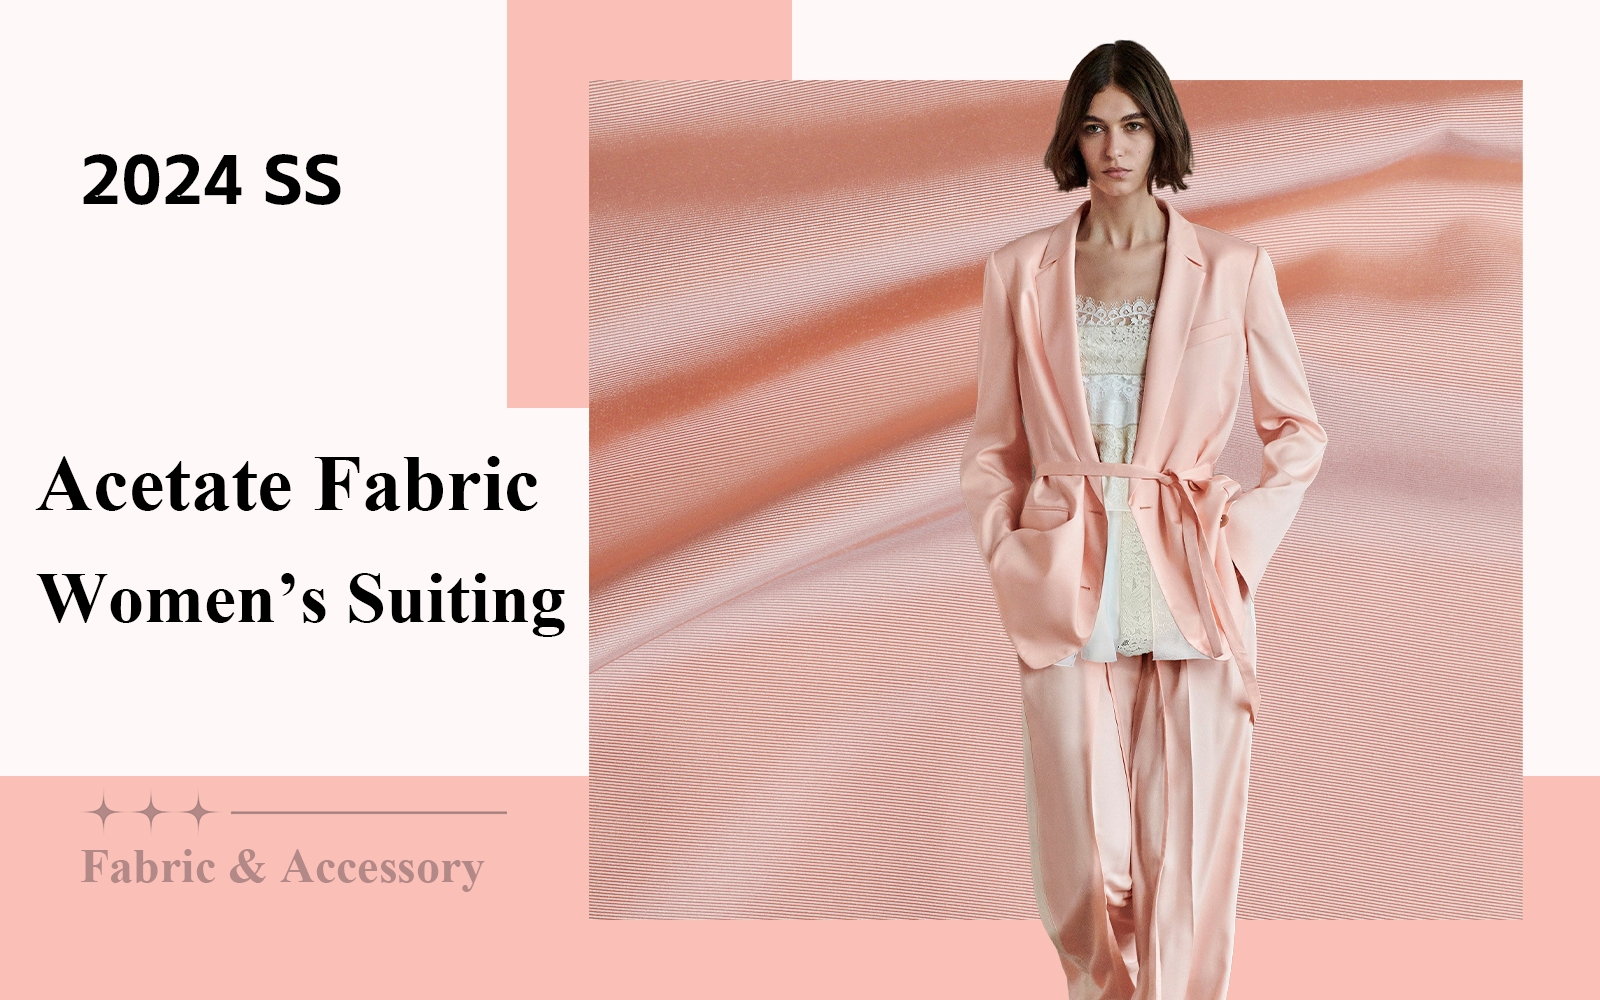 Acetate Fabric -- The Fabric Trend for Women's Suiting